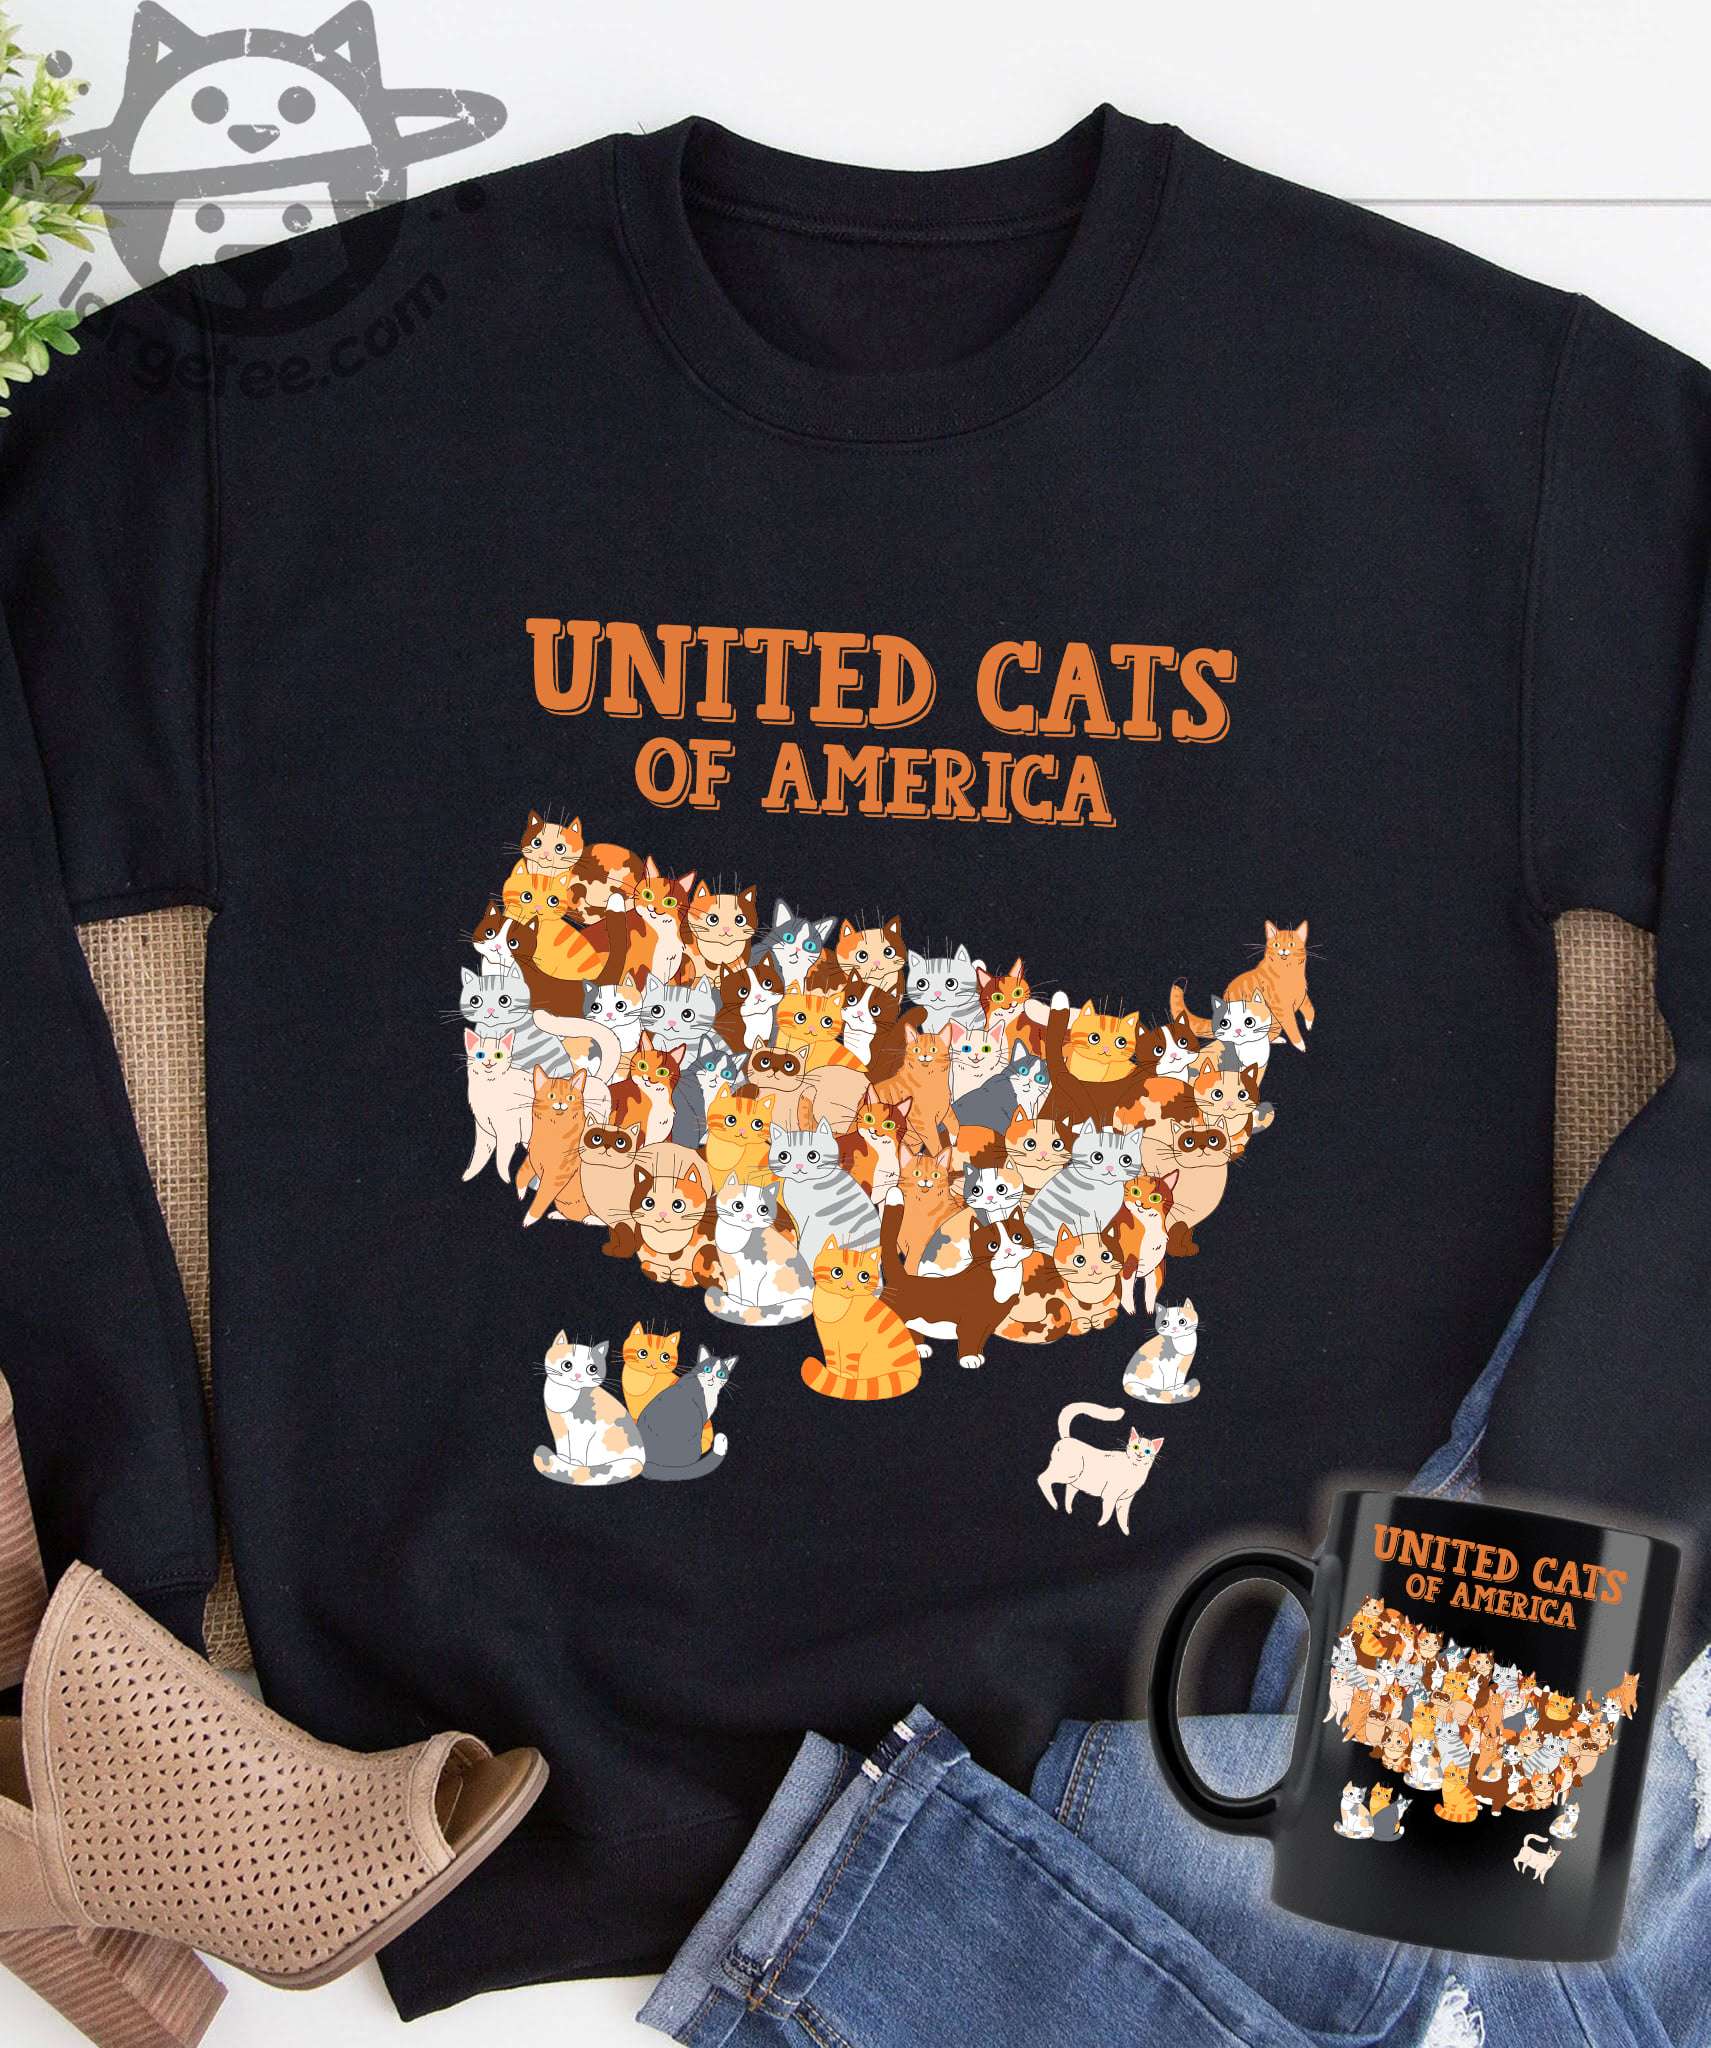 United cats of America - American loves cat, gift for cat person